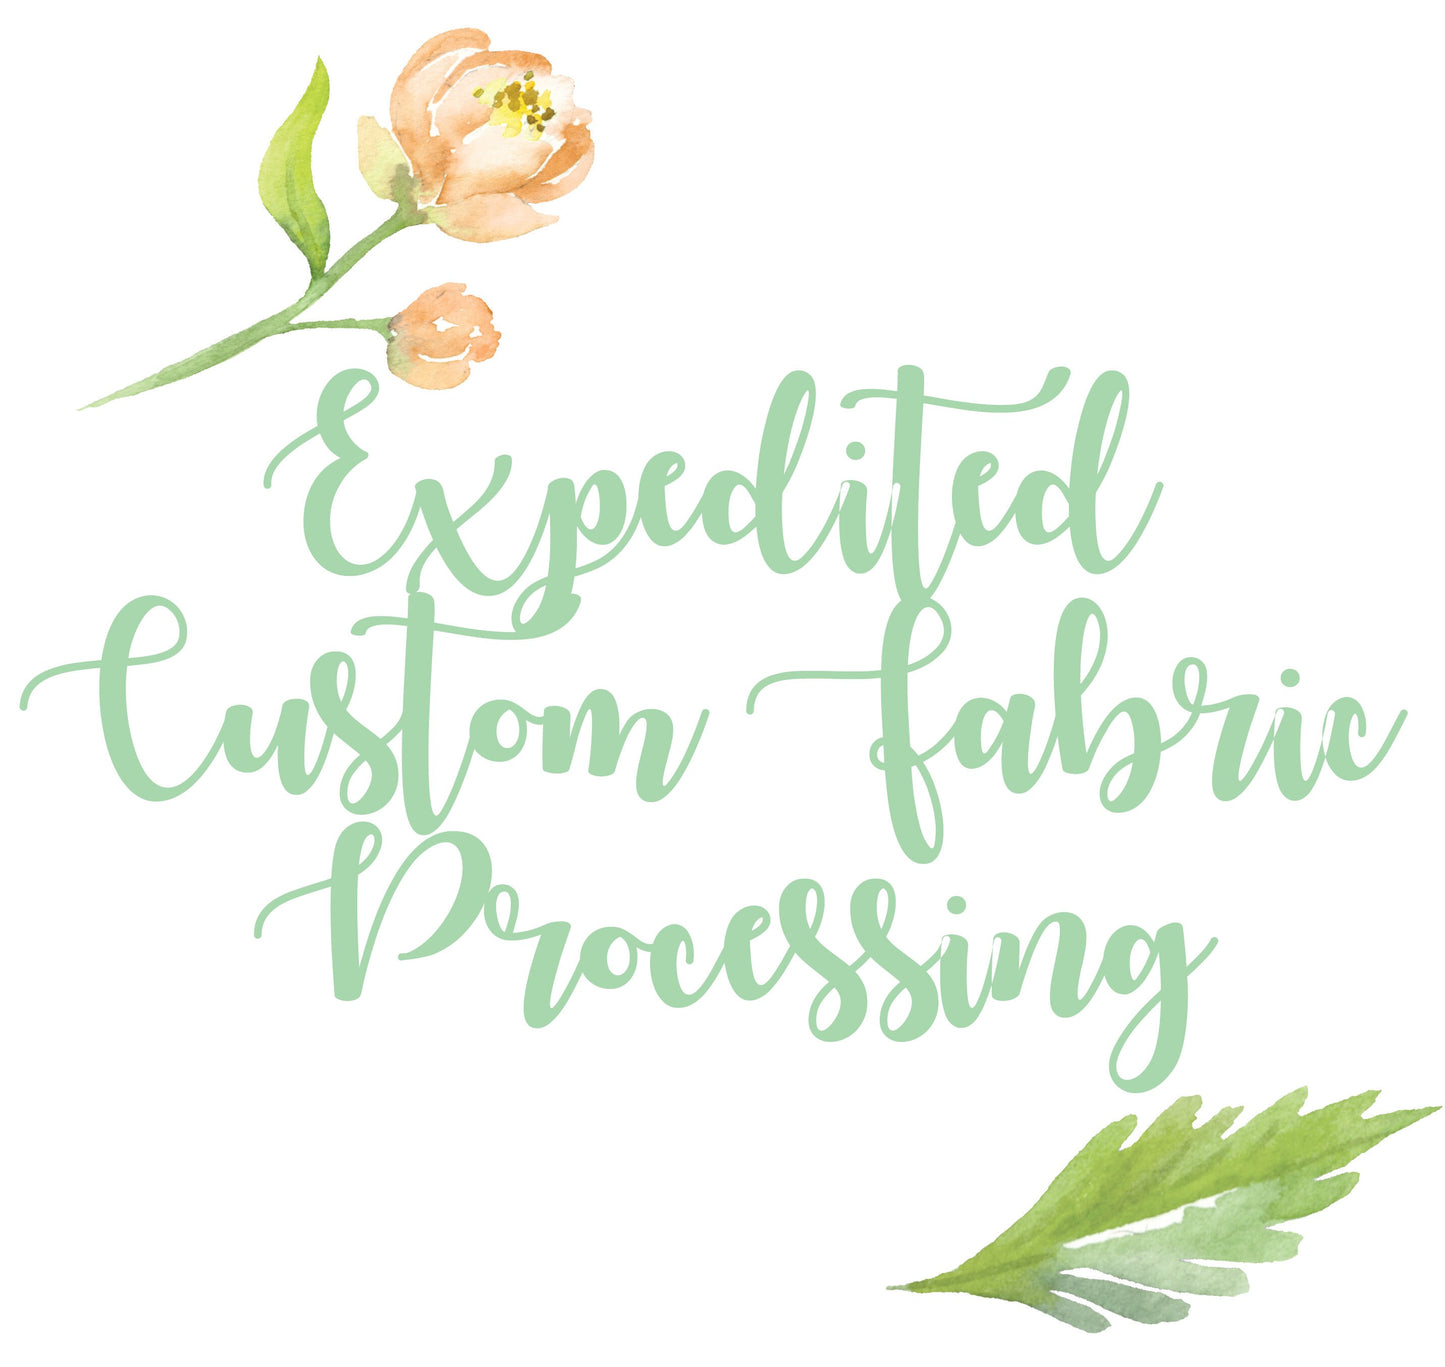 5-7 Business Days Expedited Processing